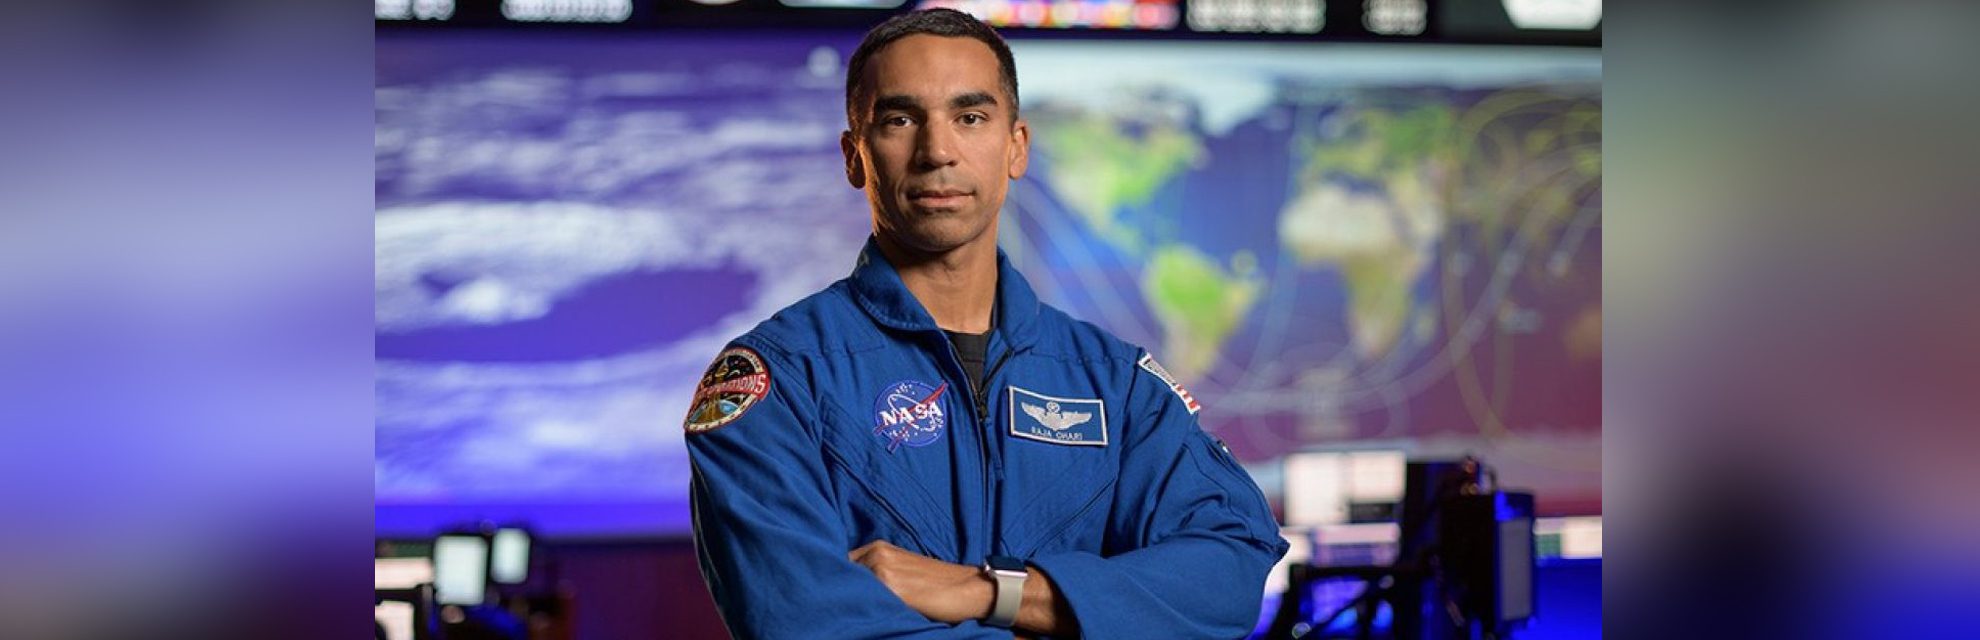 Watch Indian-American NASA astronaut Raja Chari, a member of the Artemis Team, talk about the Moon mission and learning how to establish and sustain a human presence far beyond Earth.